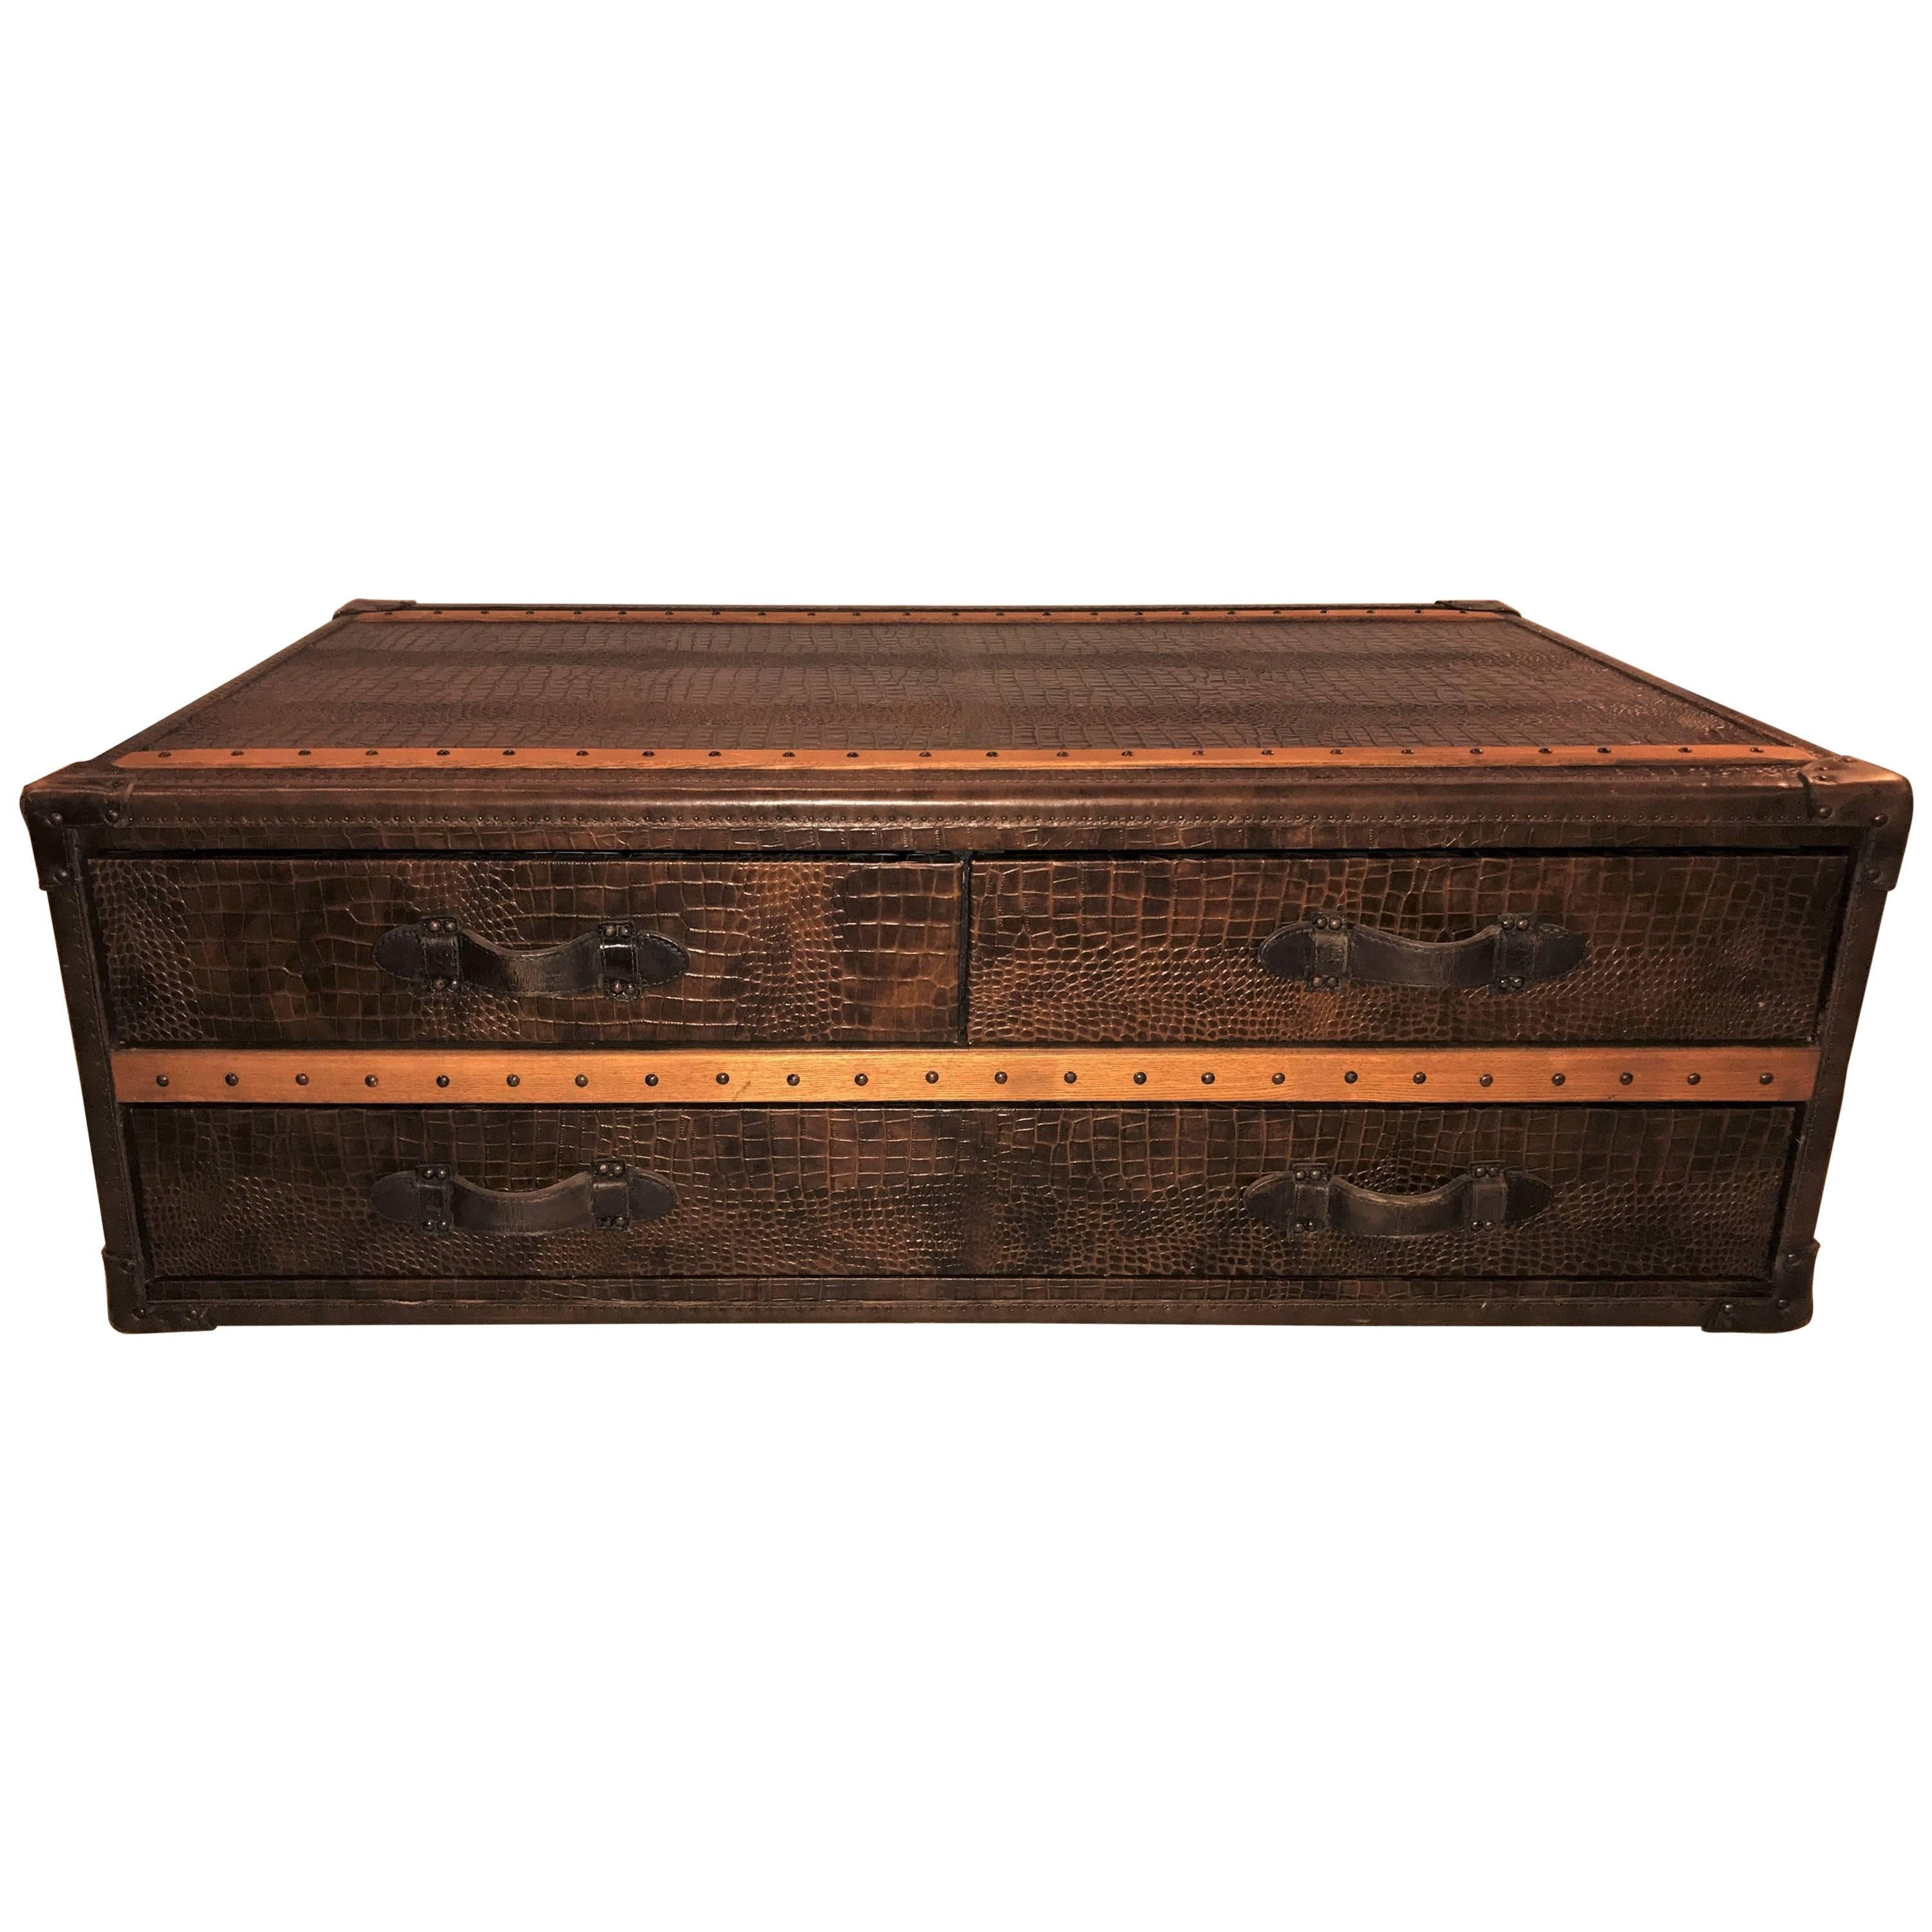 Leather Alligator Style Oak Trimmed Trunk or Coffee Table